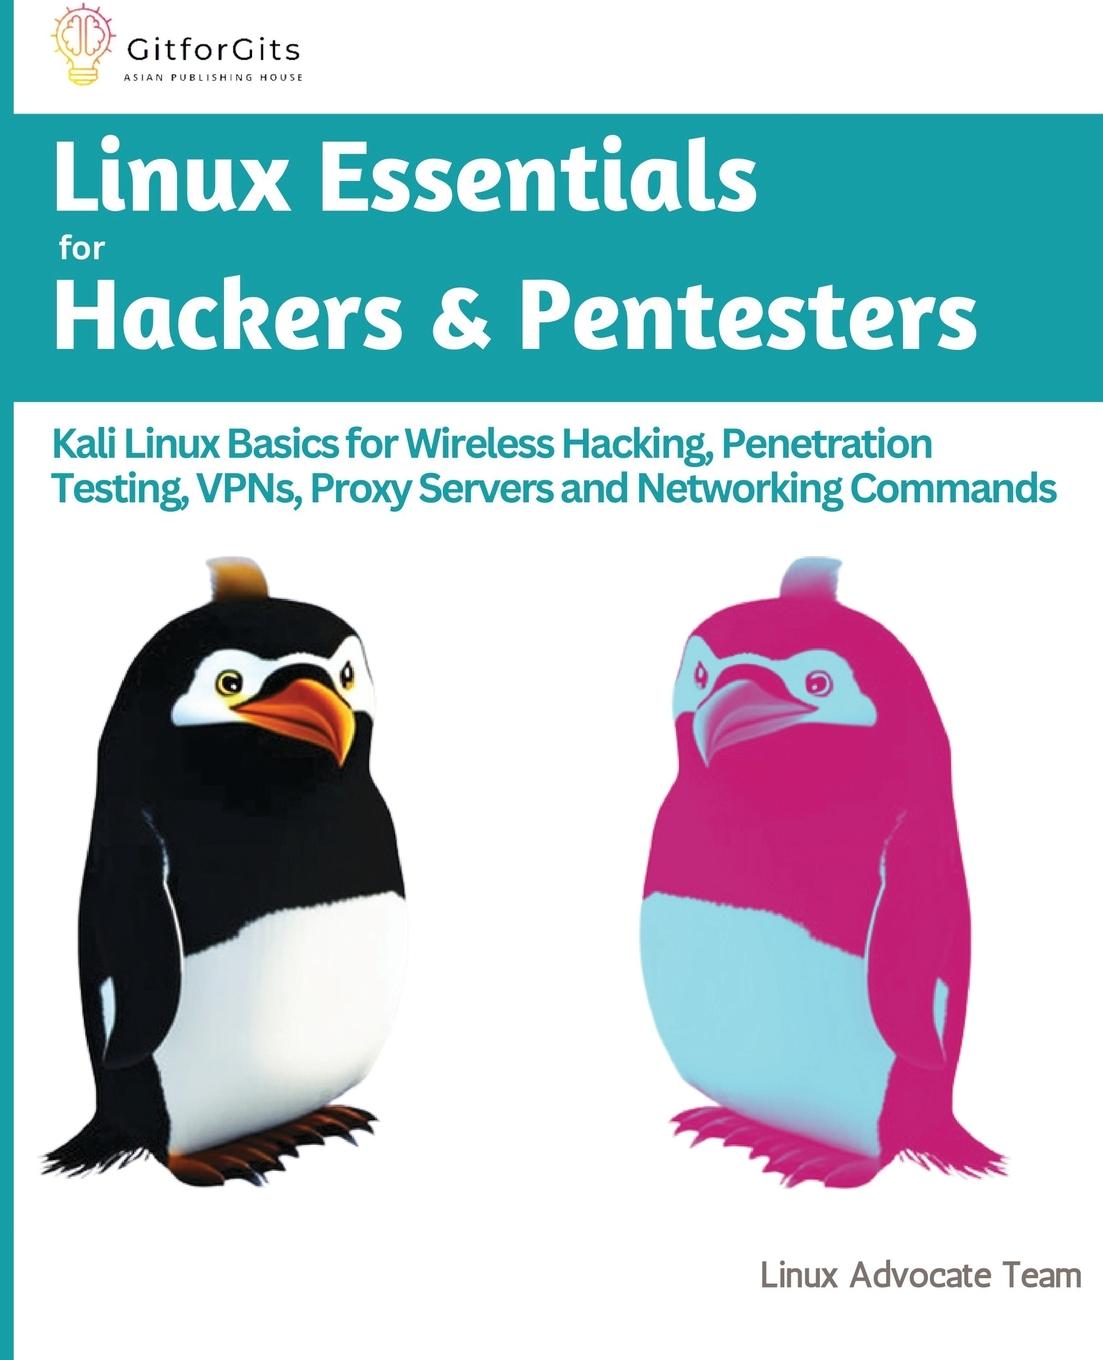 Book Linux Essentials for Hackers & Pentesters: Kali Linux Basics for Wireless Hacking, Penetration Testing, VPNs, Proxy Servers and Networking Commands 